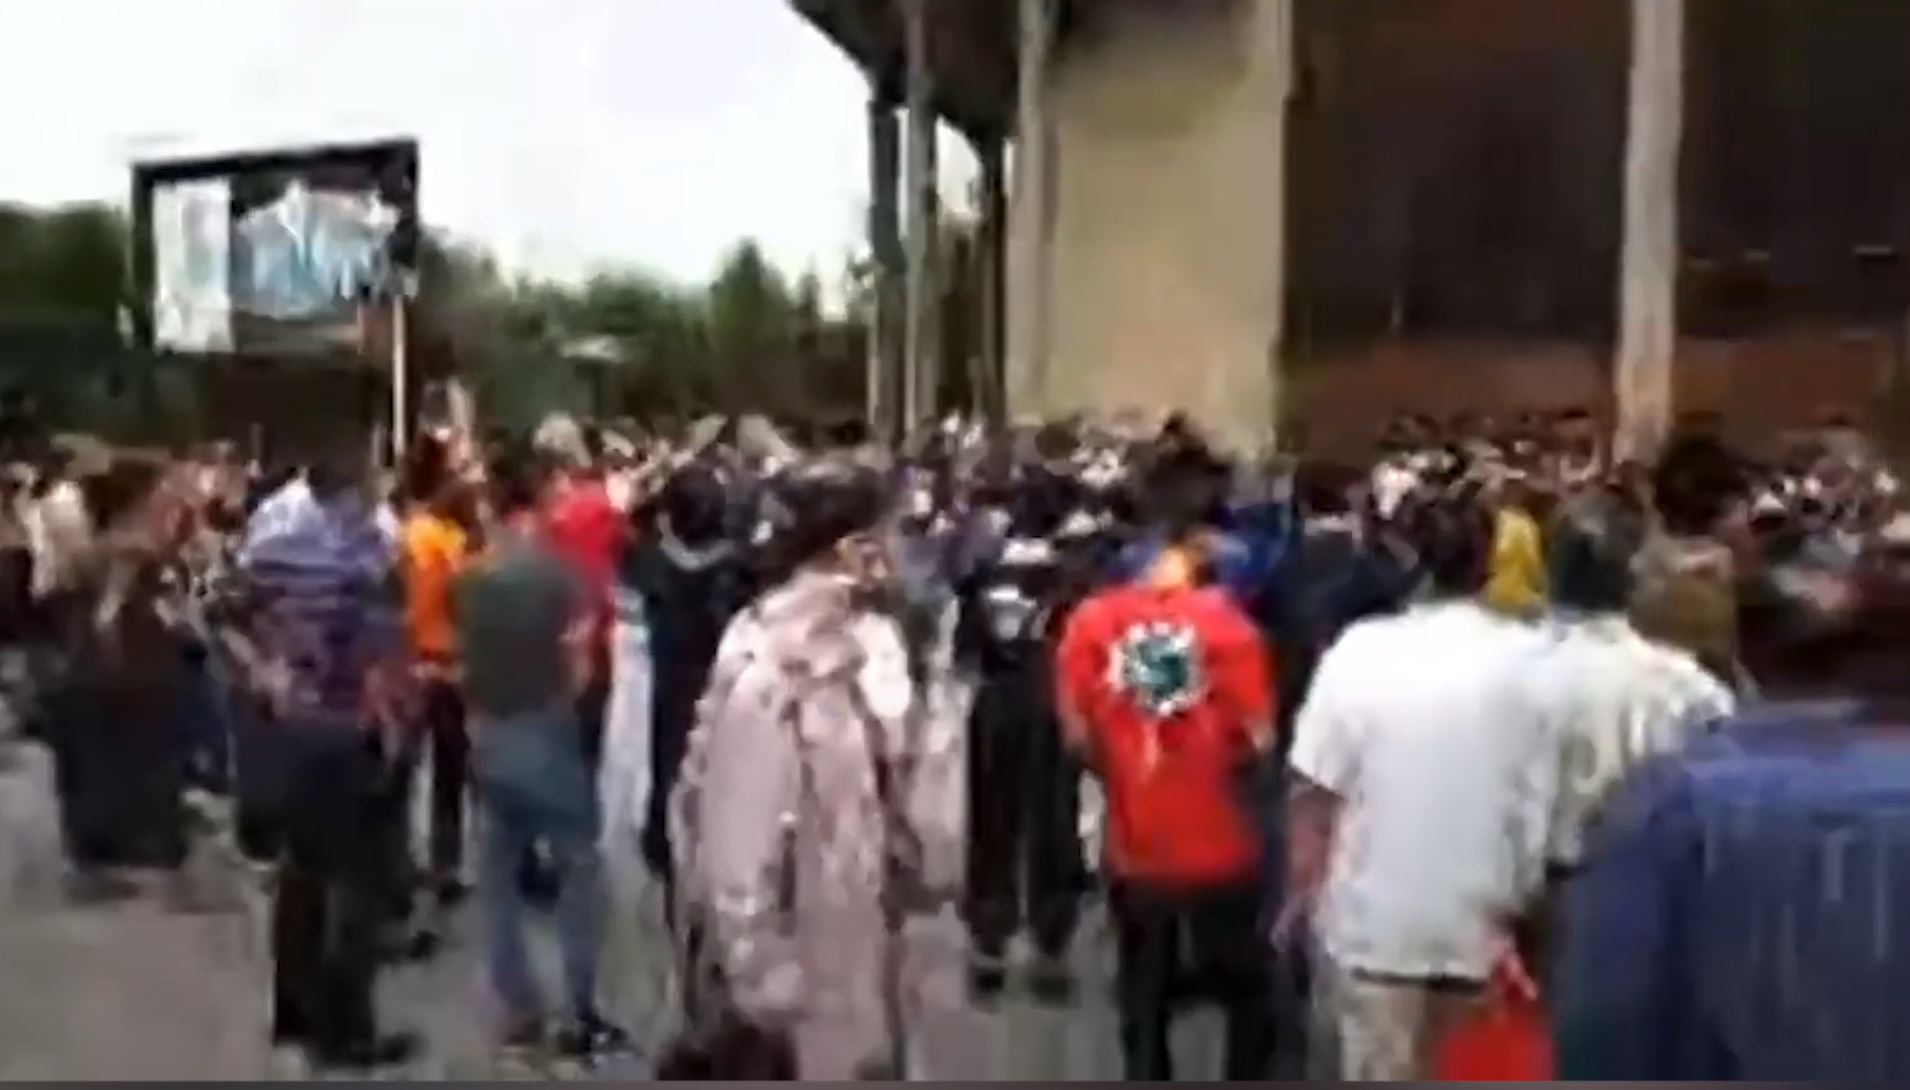 Security forces attack peaceful protests in Tehran